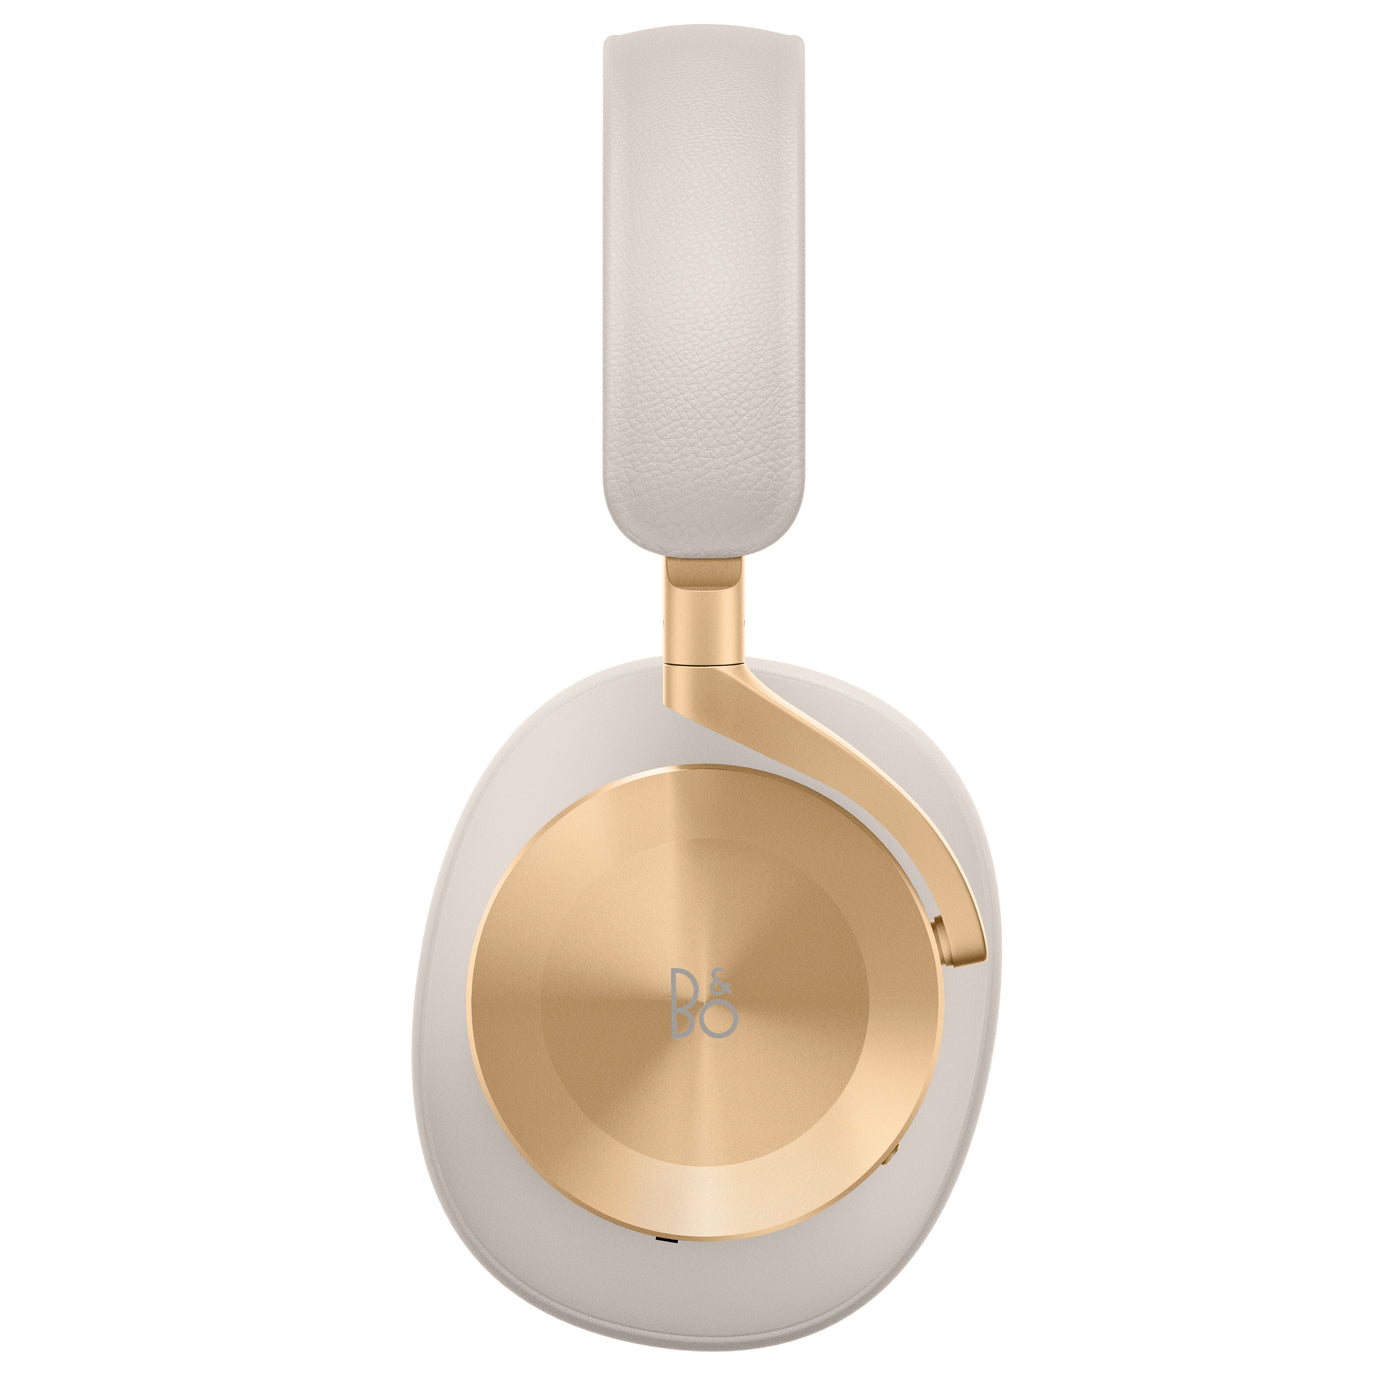 The ultimate headphones for travellers. Beoplay H95 features exceptional adaptive active noise cancellation that provides you with peaceful silence in any environment. 